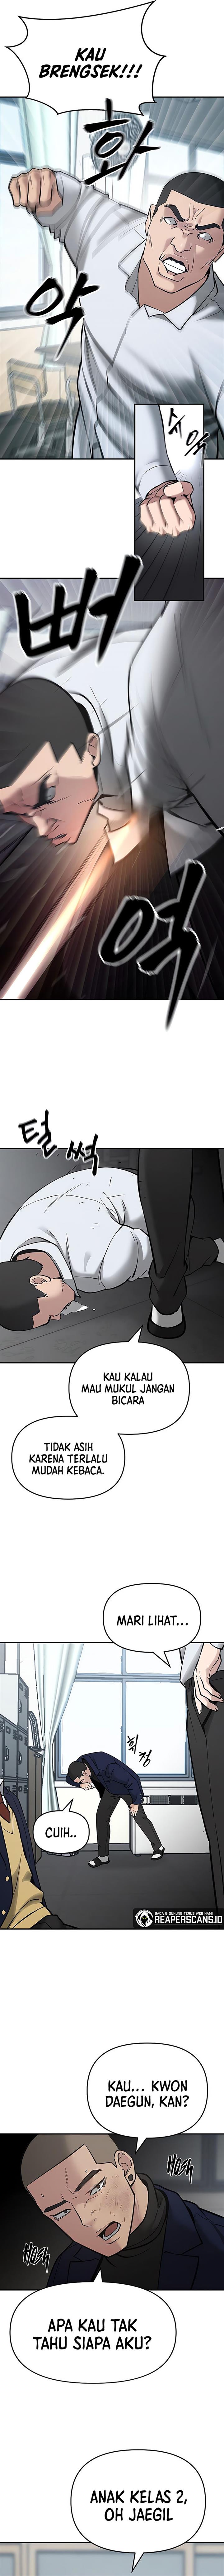 The Bully In Charge Chapter 48